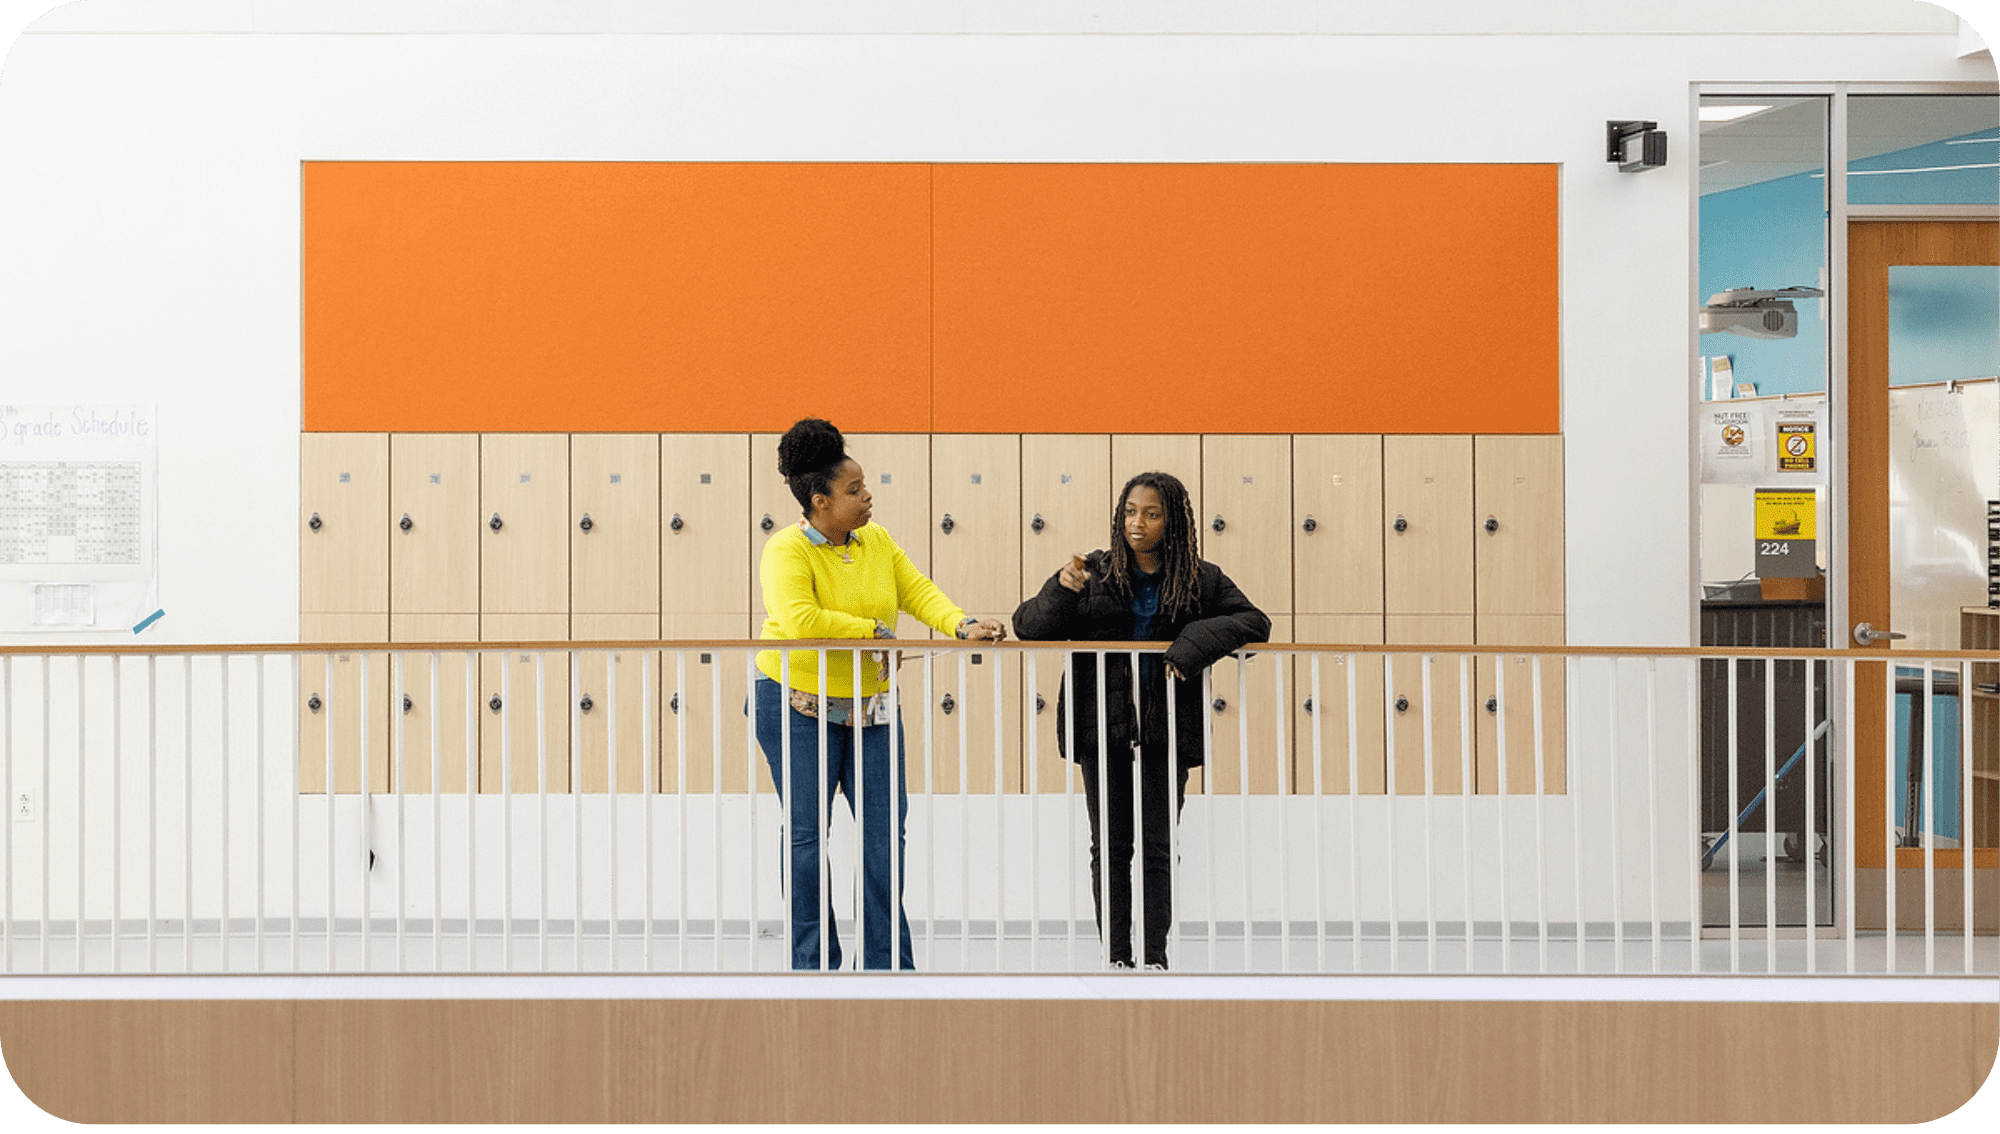 Teacher and student engaged in a conversation in the hallway